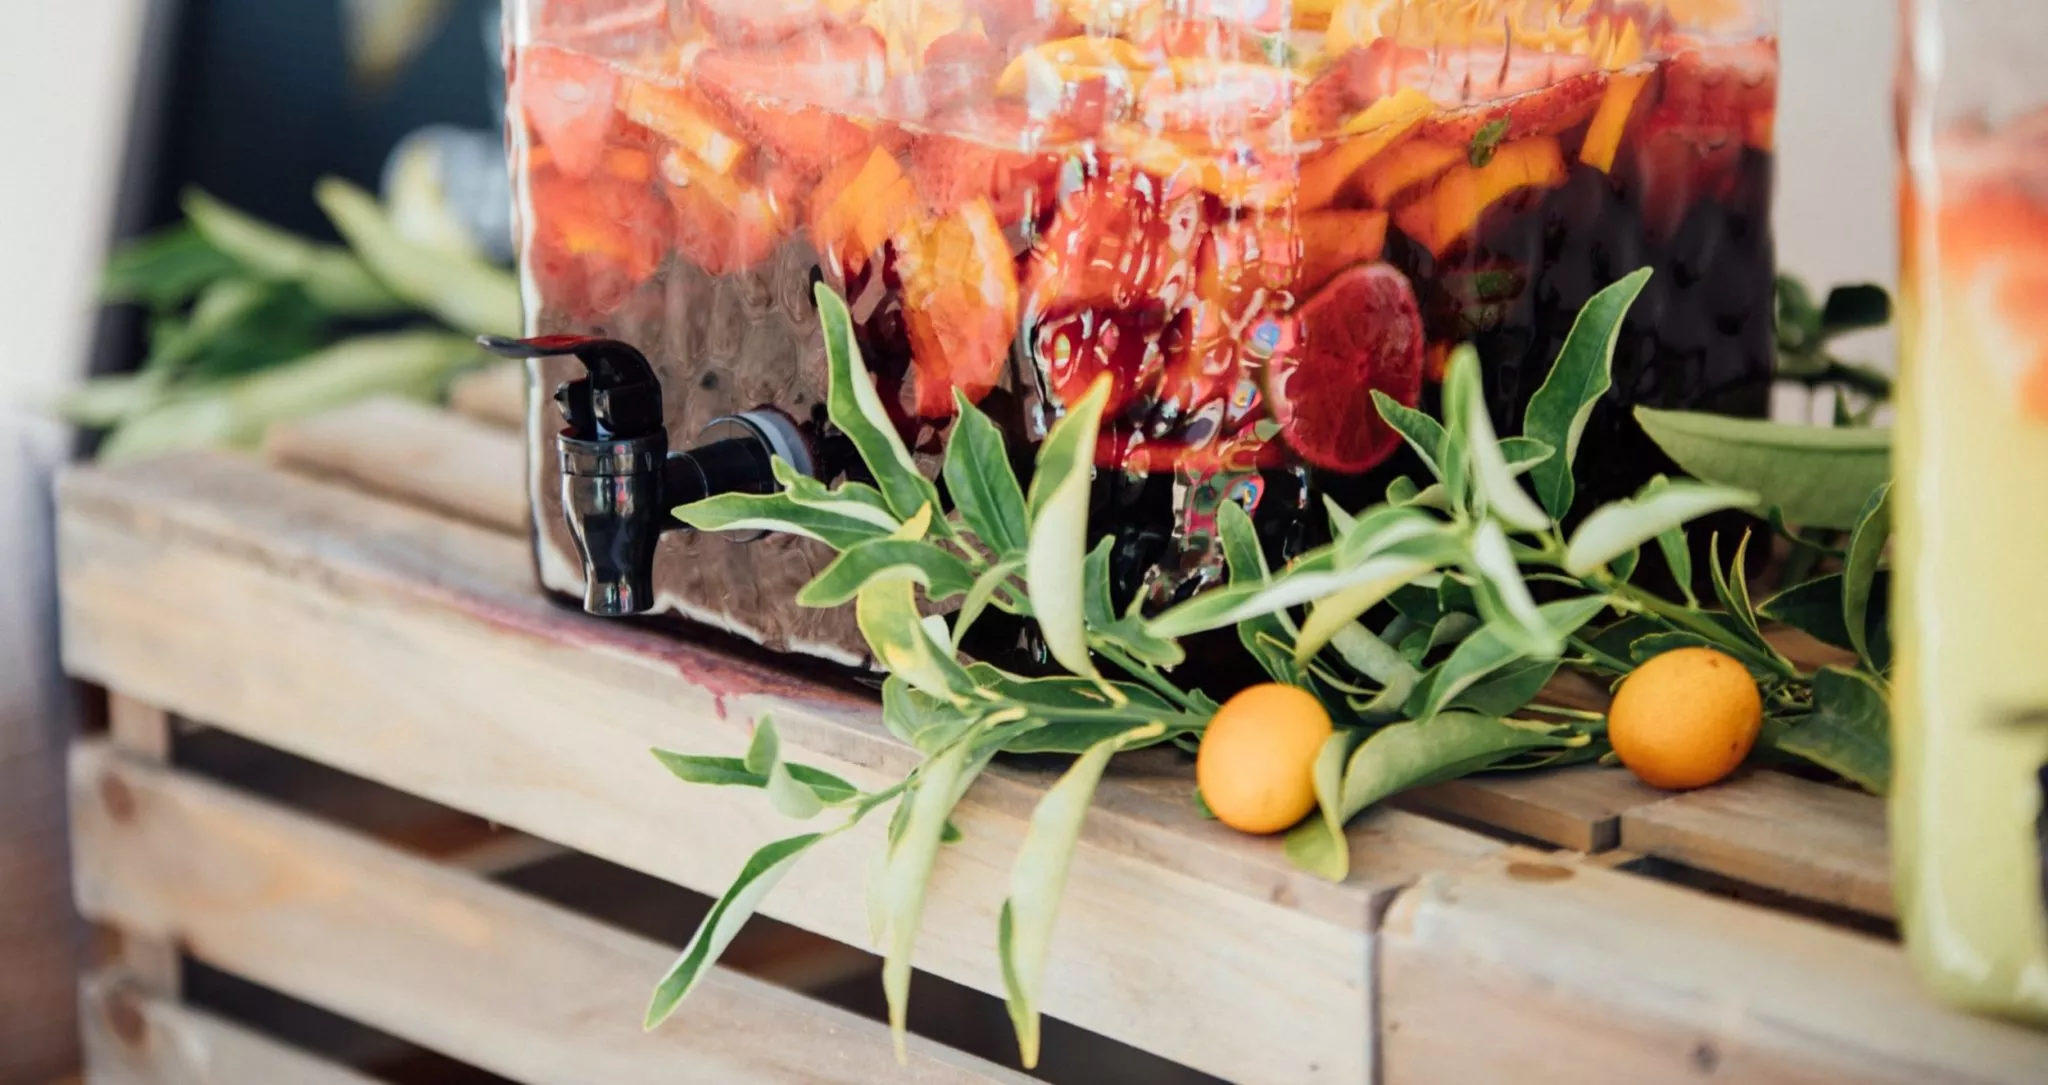 Learn to make sangria in Barcelona